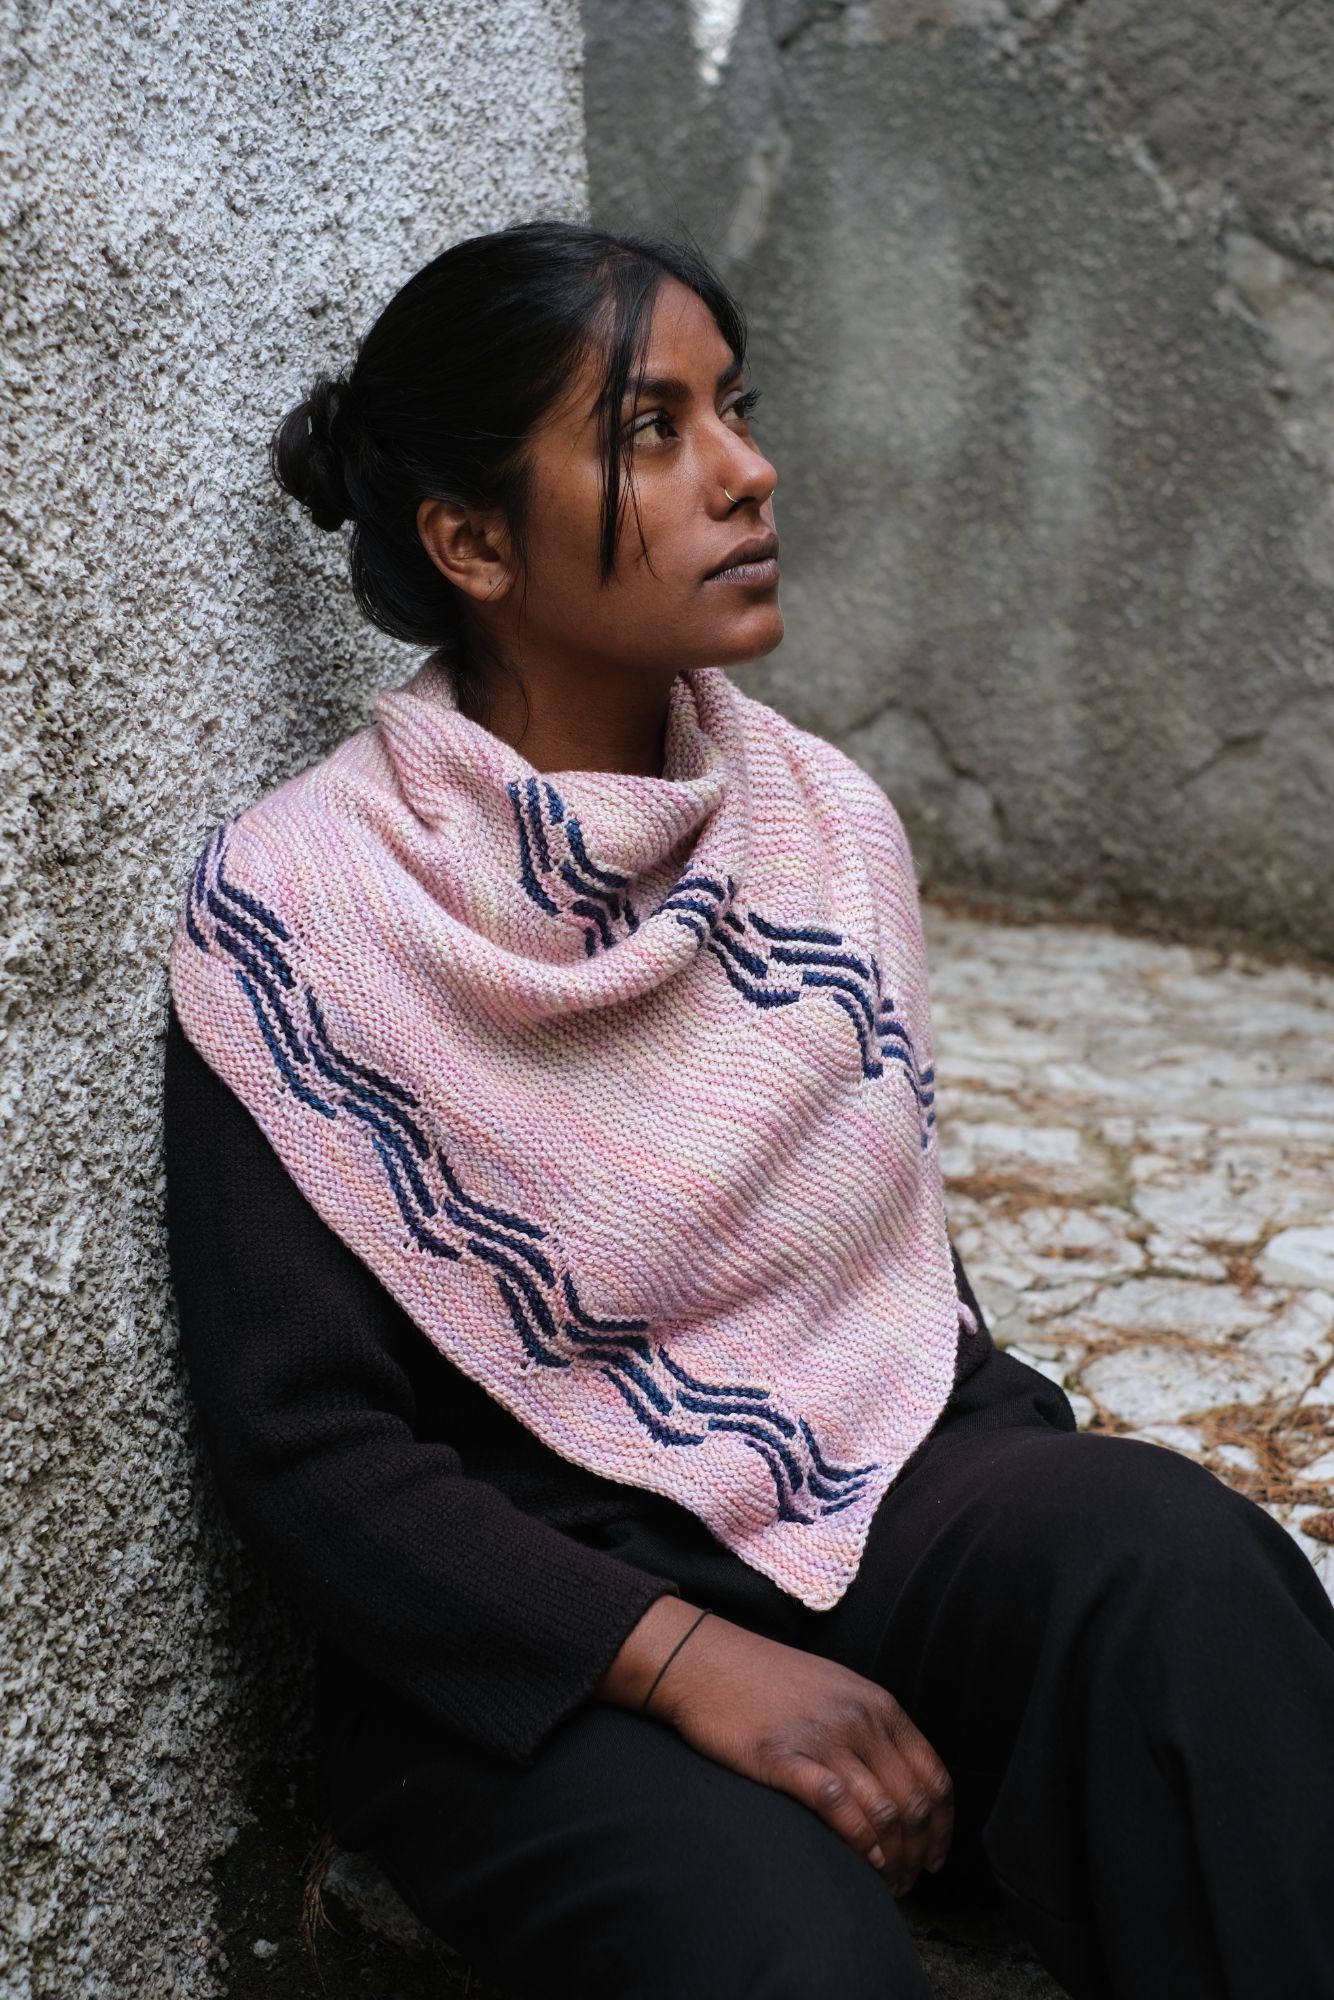 brown skinned person with hair pulled back from their face, they havce some strands in front and a a nose ring on either side of their nose. They are  facing to the side and looking up and away. They wear a pink knitted shawl draped around their shoulderd which features dark blue sectional waves. 